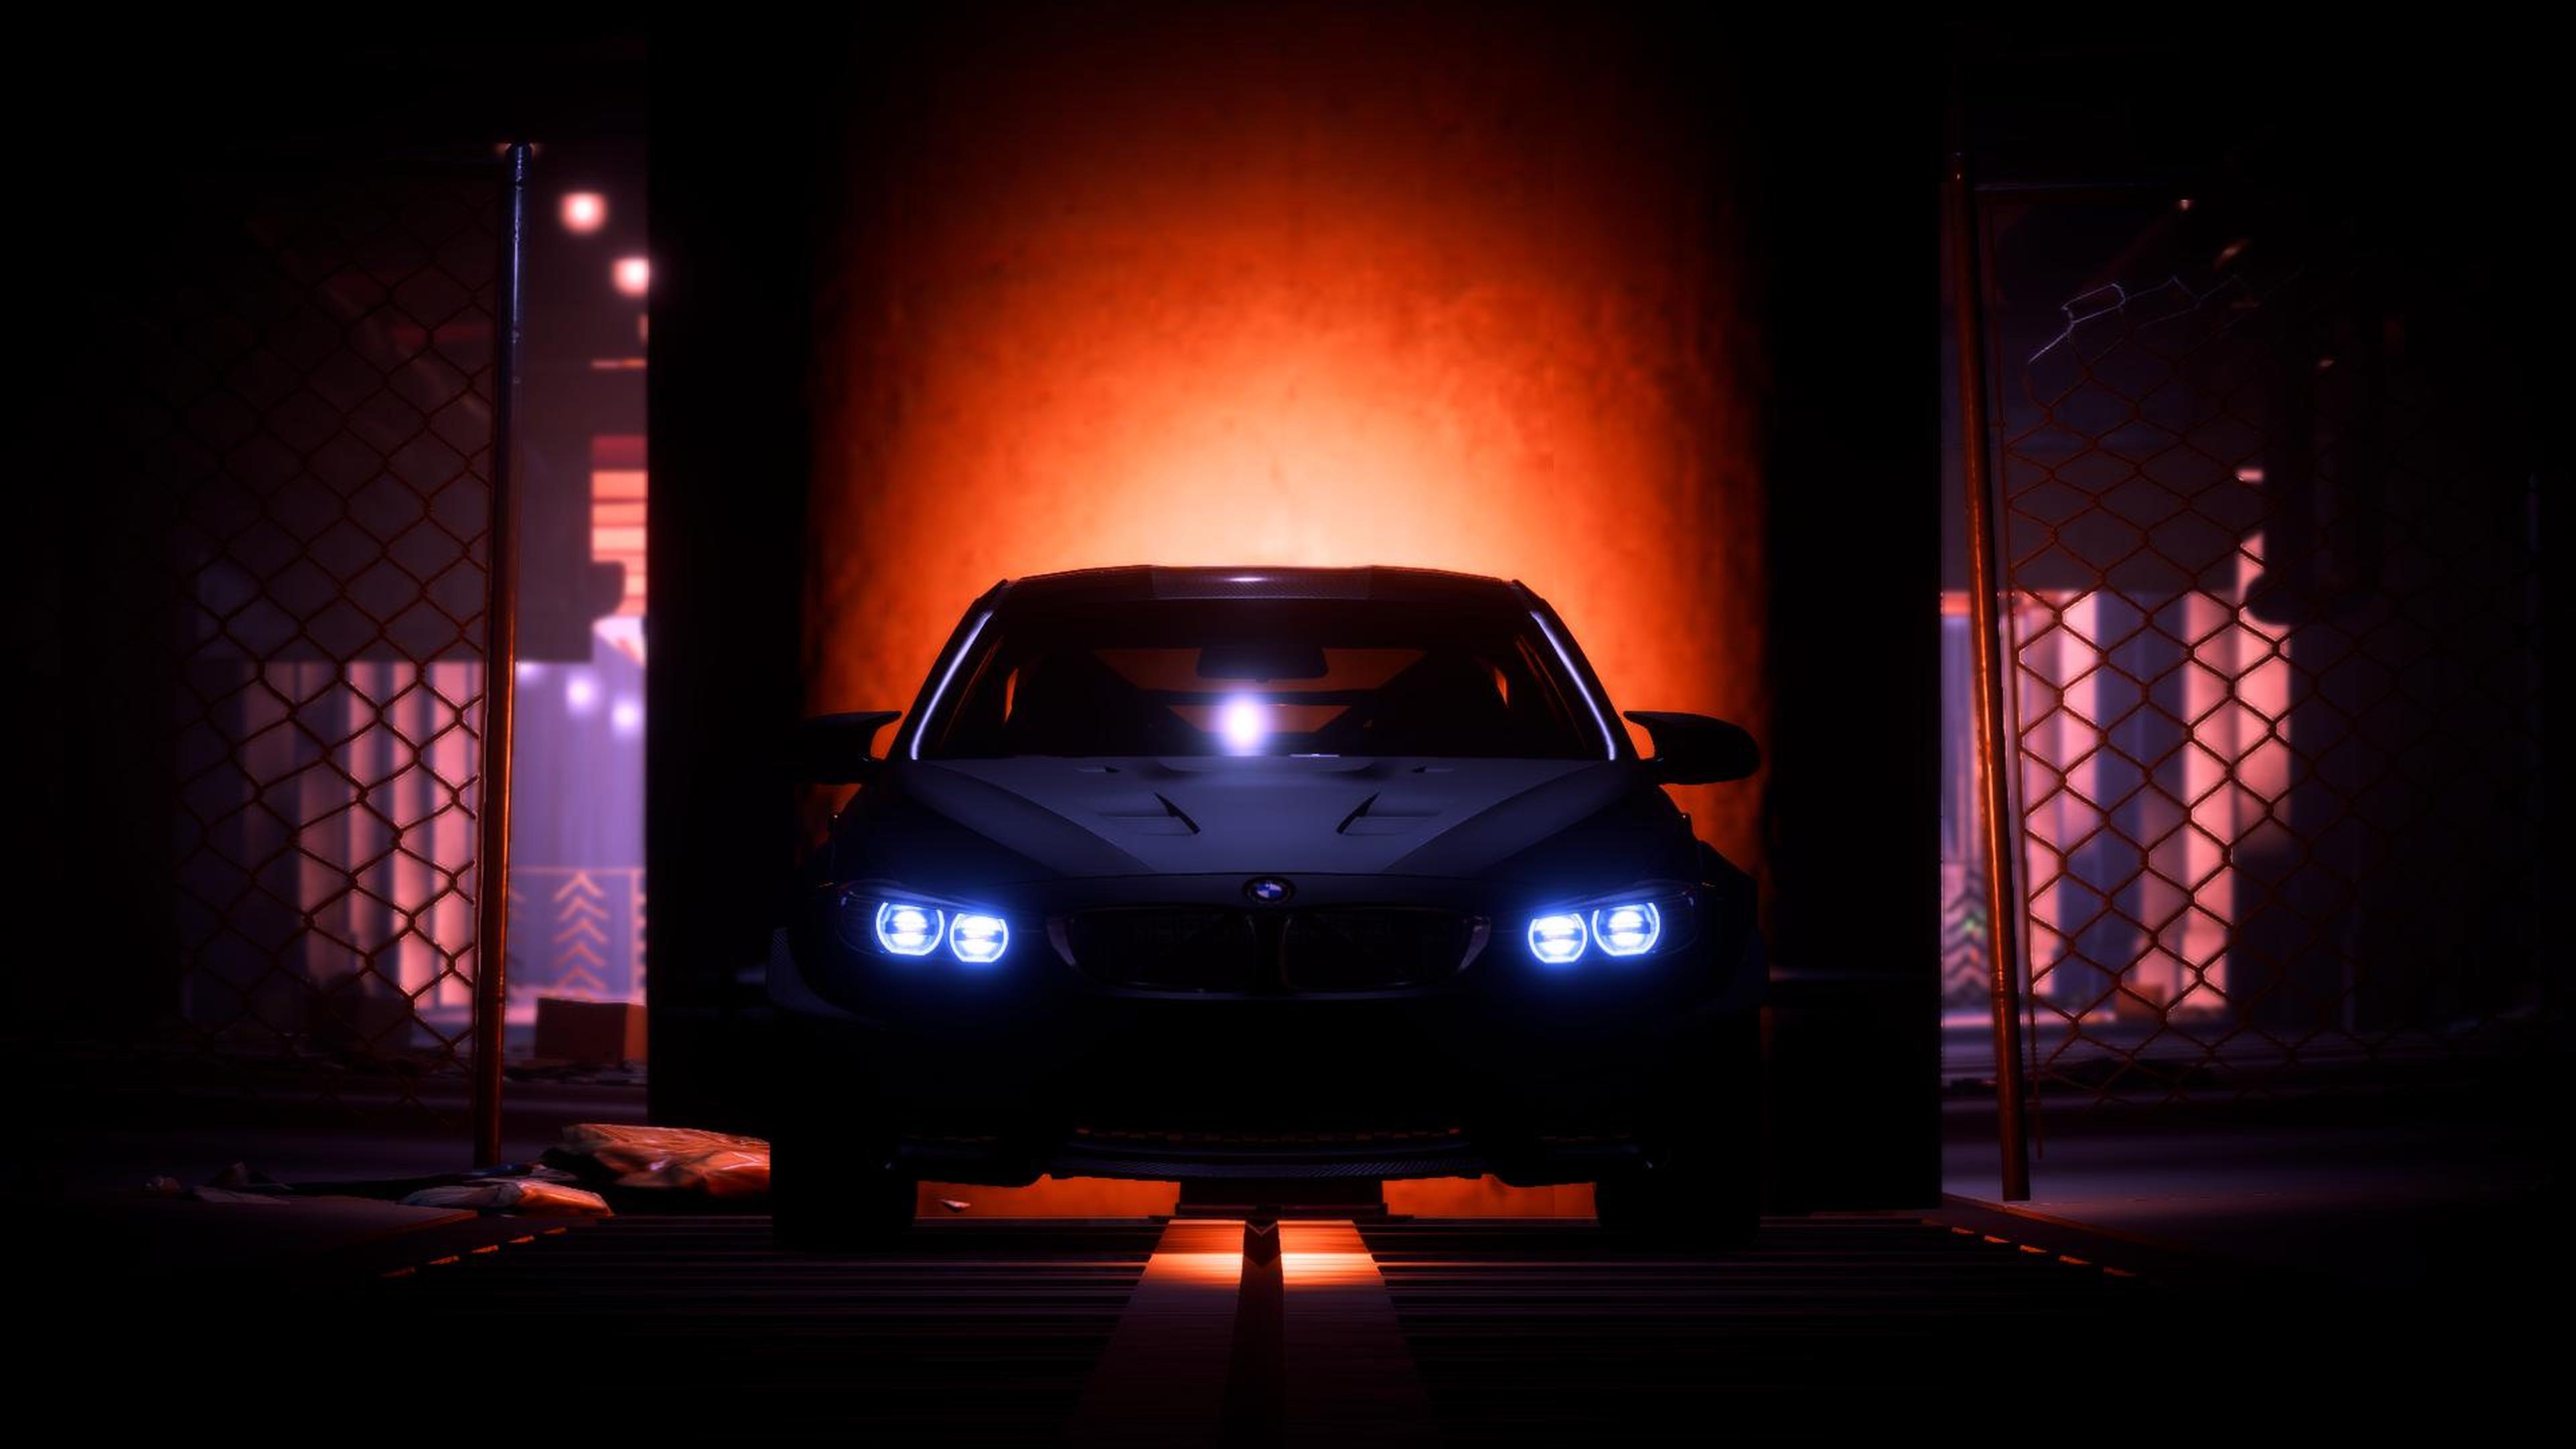 Download 3840x2400 wallpaper bmw, headlight, need for speed, video